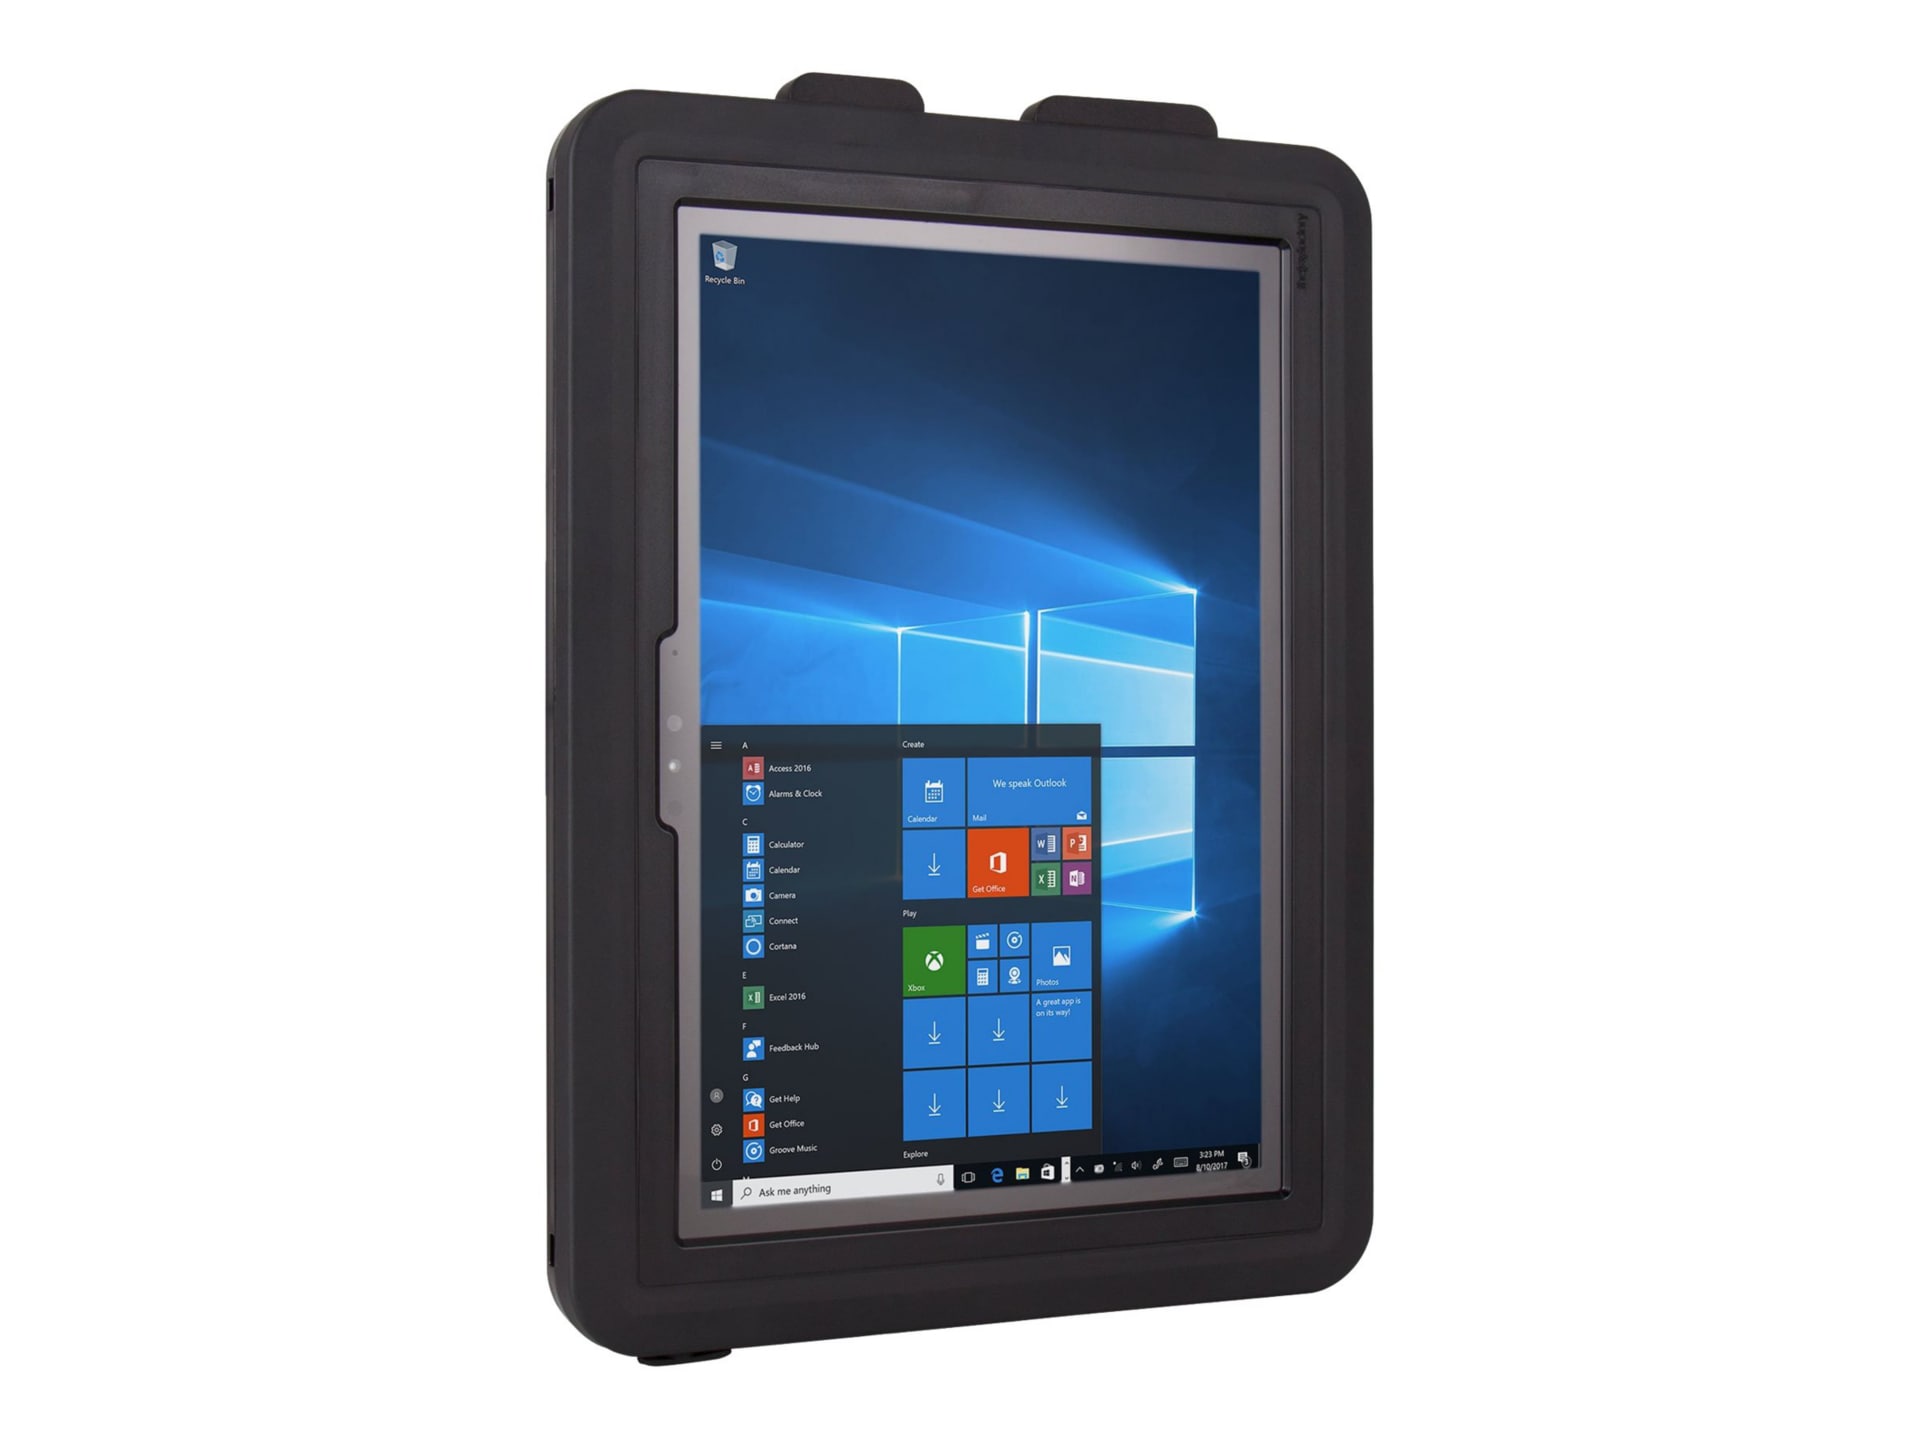 The Joy Factory aXtion Pro M - protective waterproof case for tablet